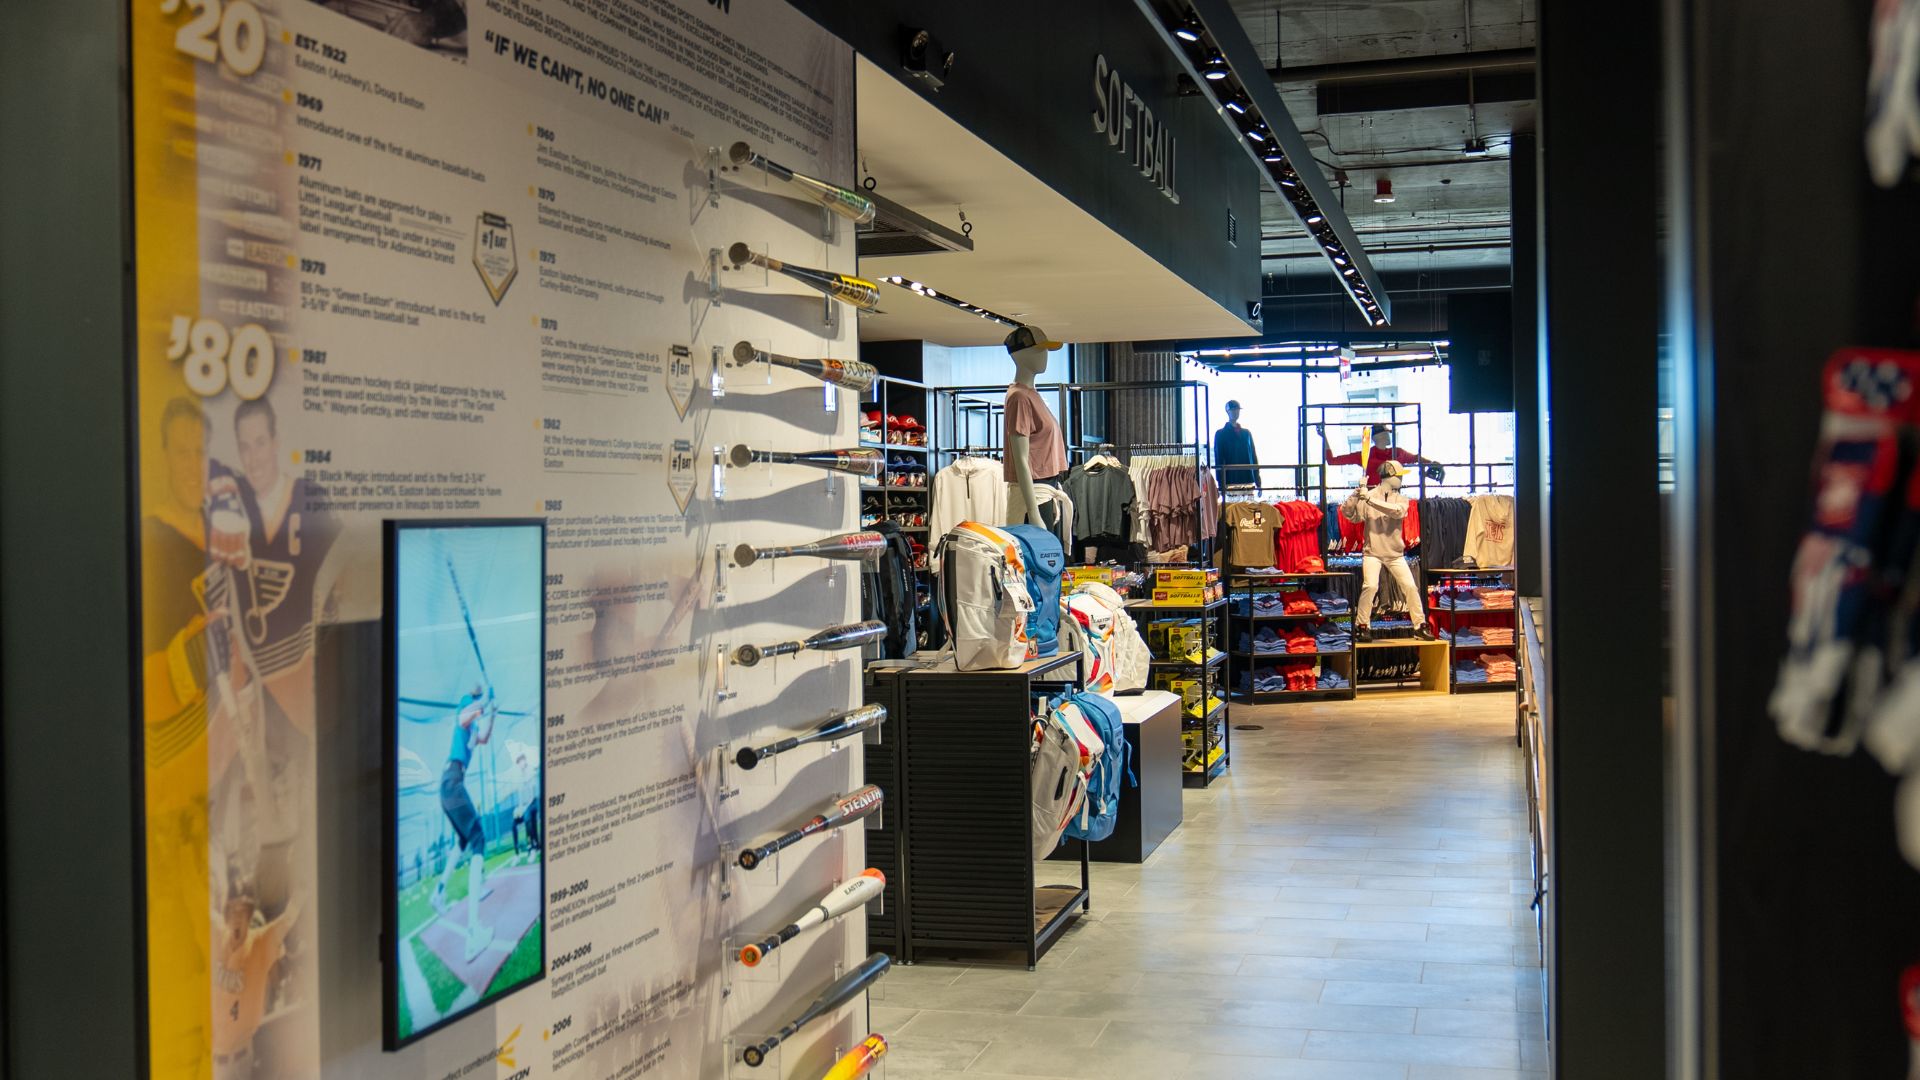 The Rawlings Experience features a timeline of important moments in the history of baseball and the company.